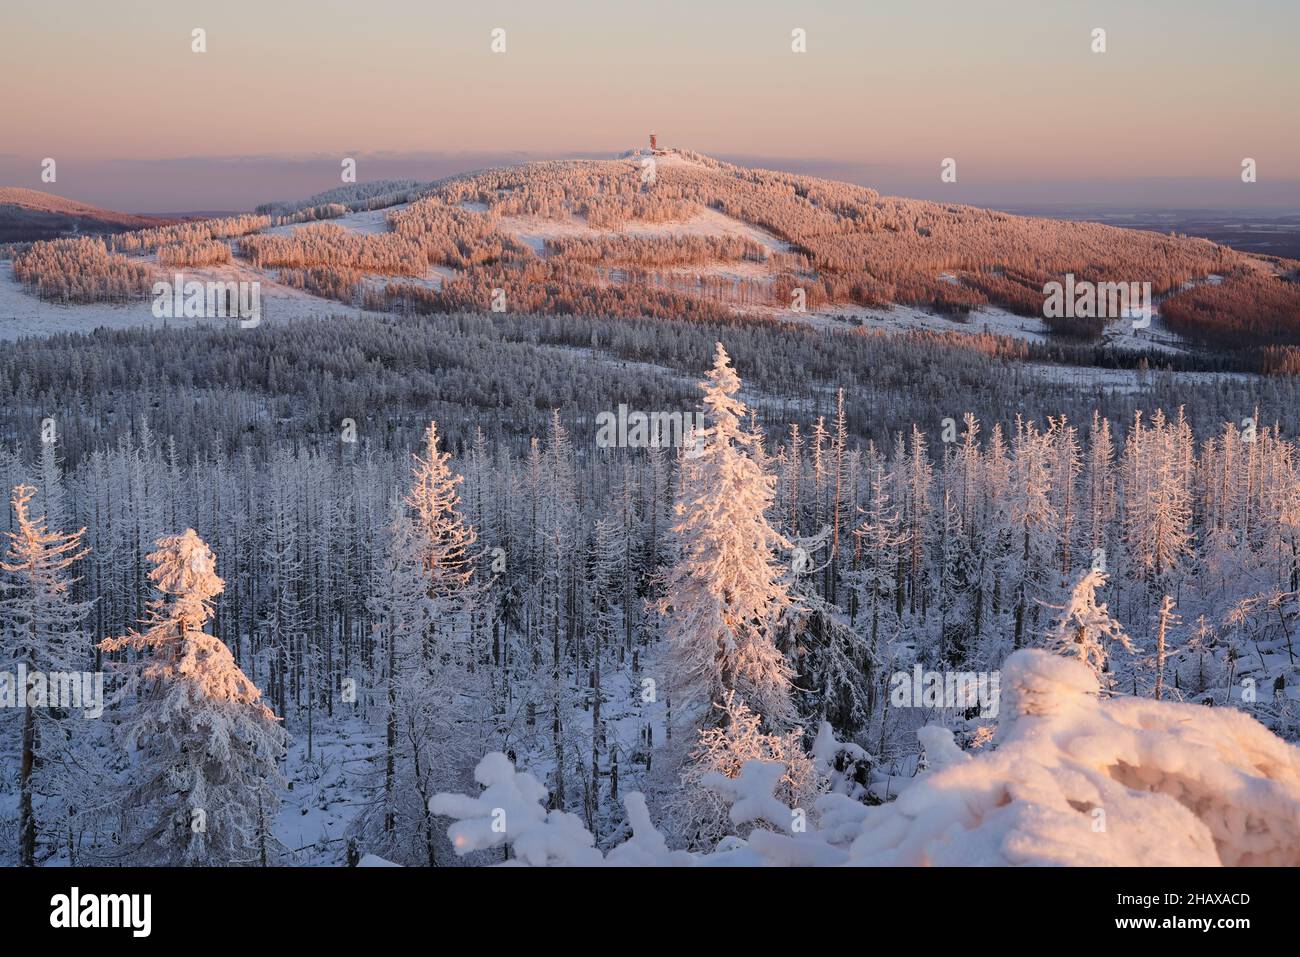 Pastel colored winter wonderland in the Harz National Park, Harz mountains, Germany. Snowy forest of Mount Wurmberg near Braunlage, Lower Saxony. Stock Photo